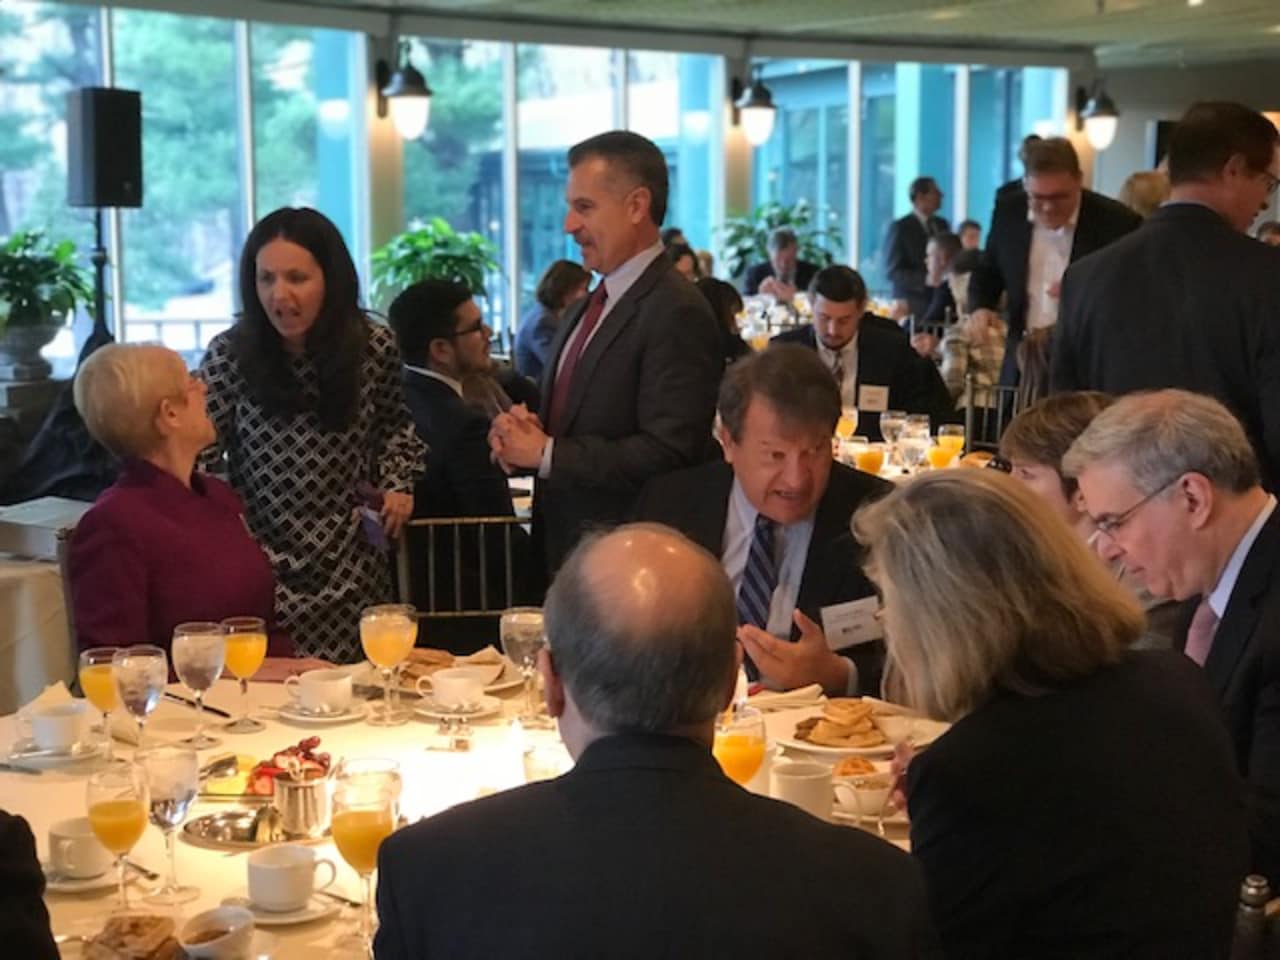 Westchester County Executive George Latimer, seated, chats with business leaders before a speech on Wednesday. Marsha Gordon, president/CEO of the Business Council of Westchester, is seated on the left.